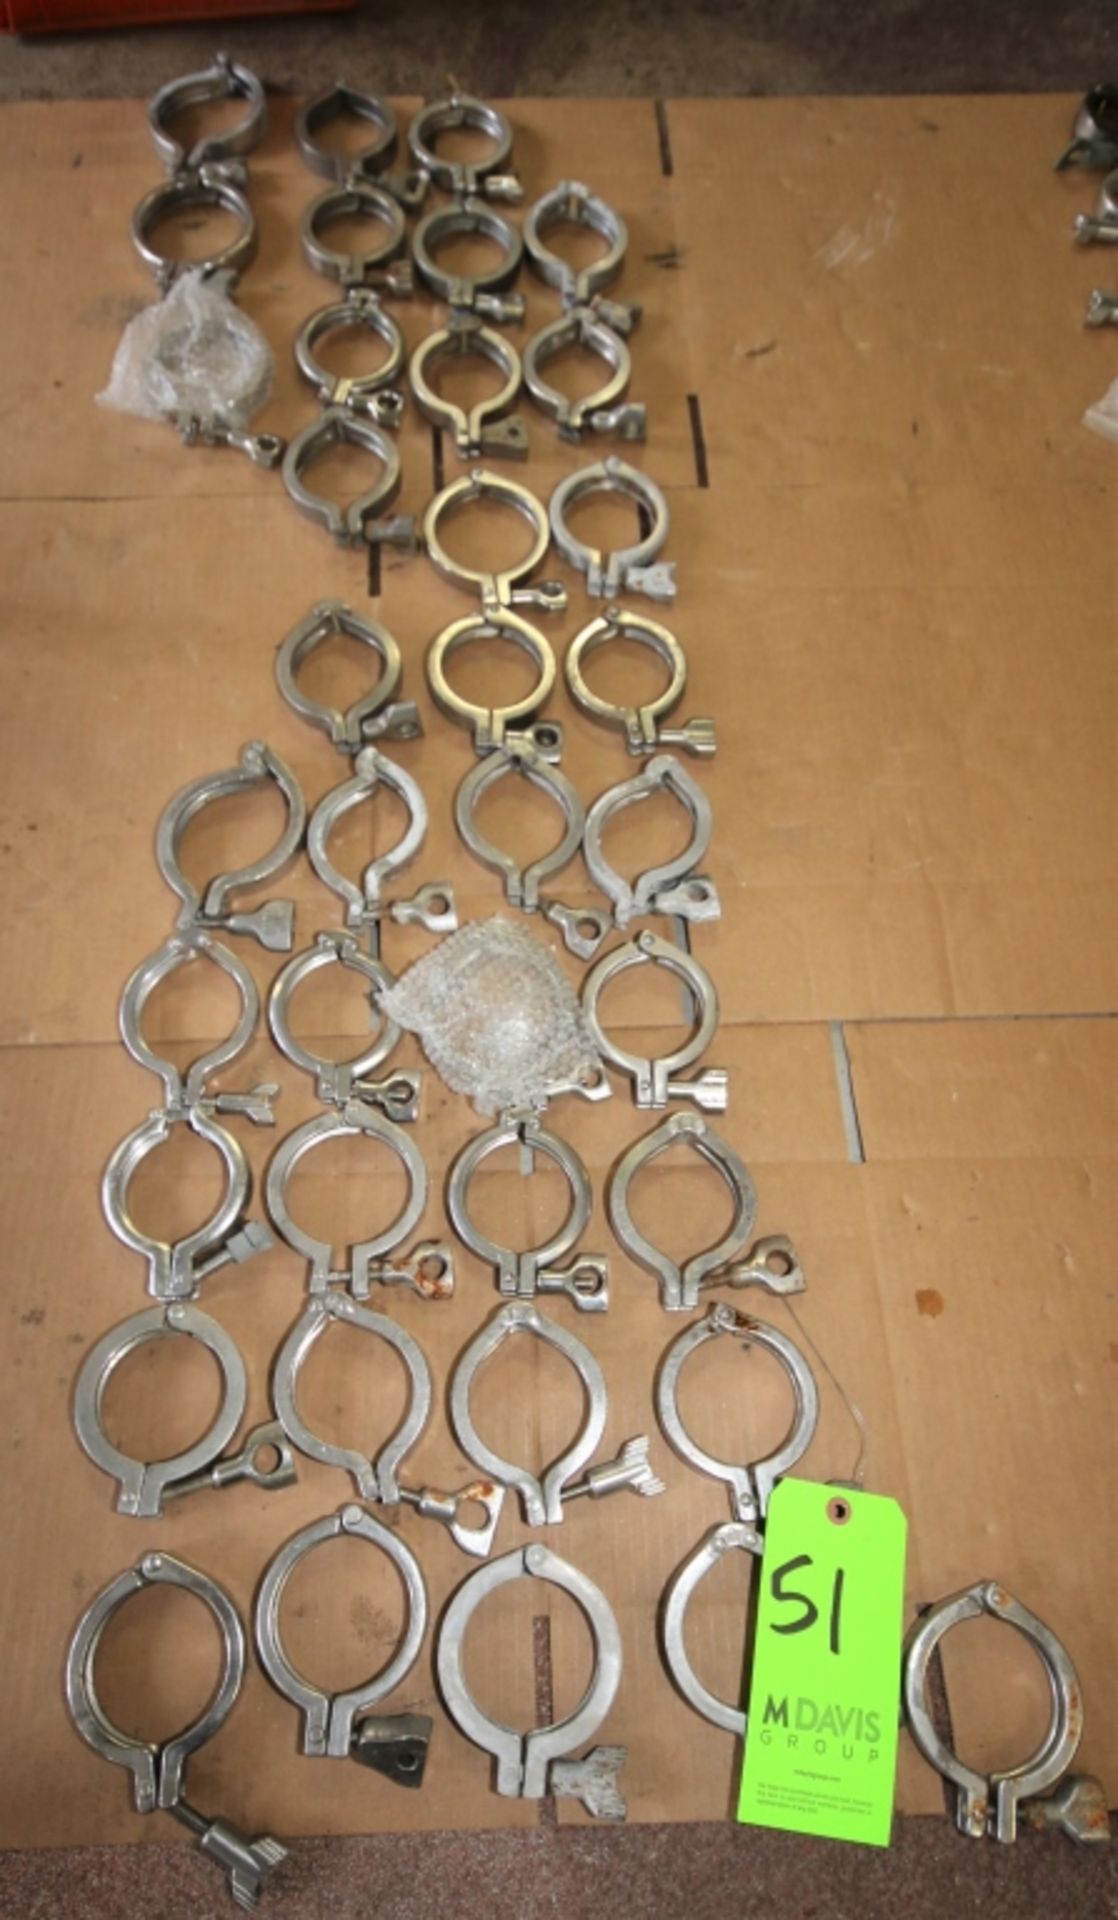 2.5" S/S Heavy Duty Tri Clamps